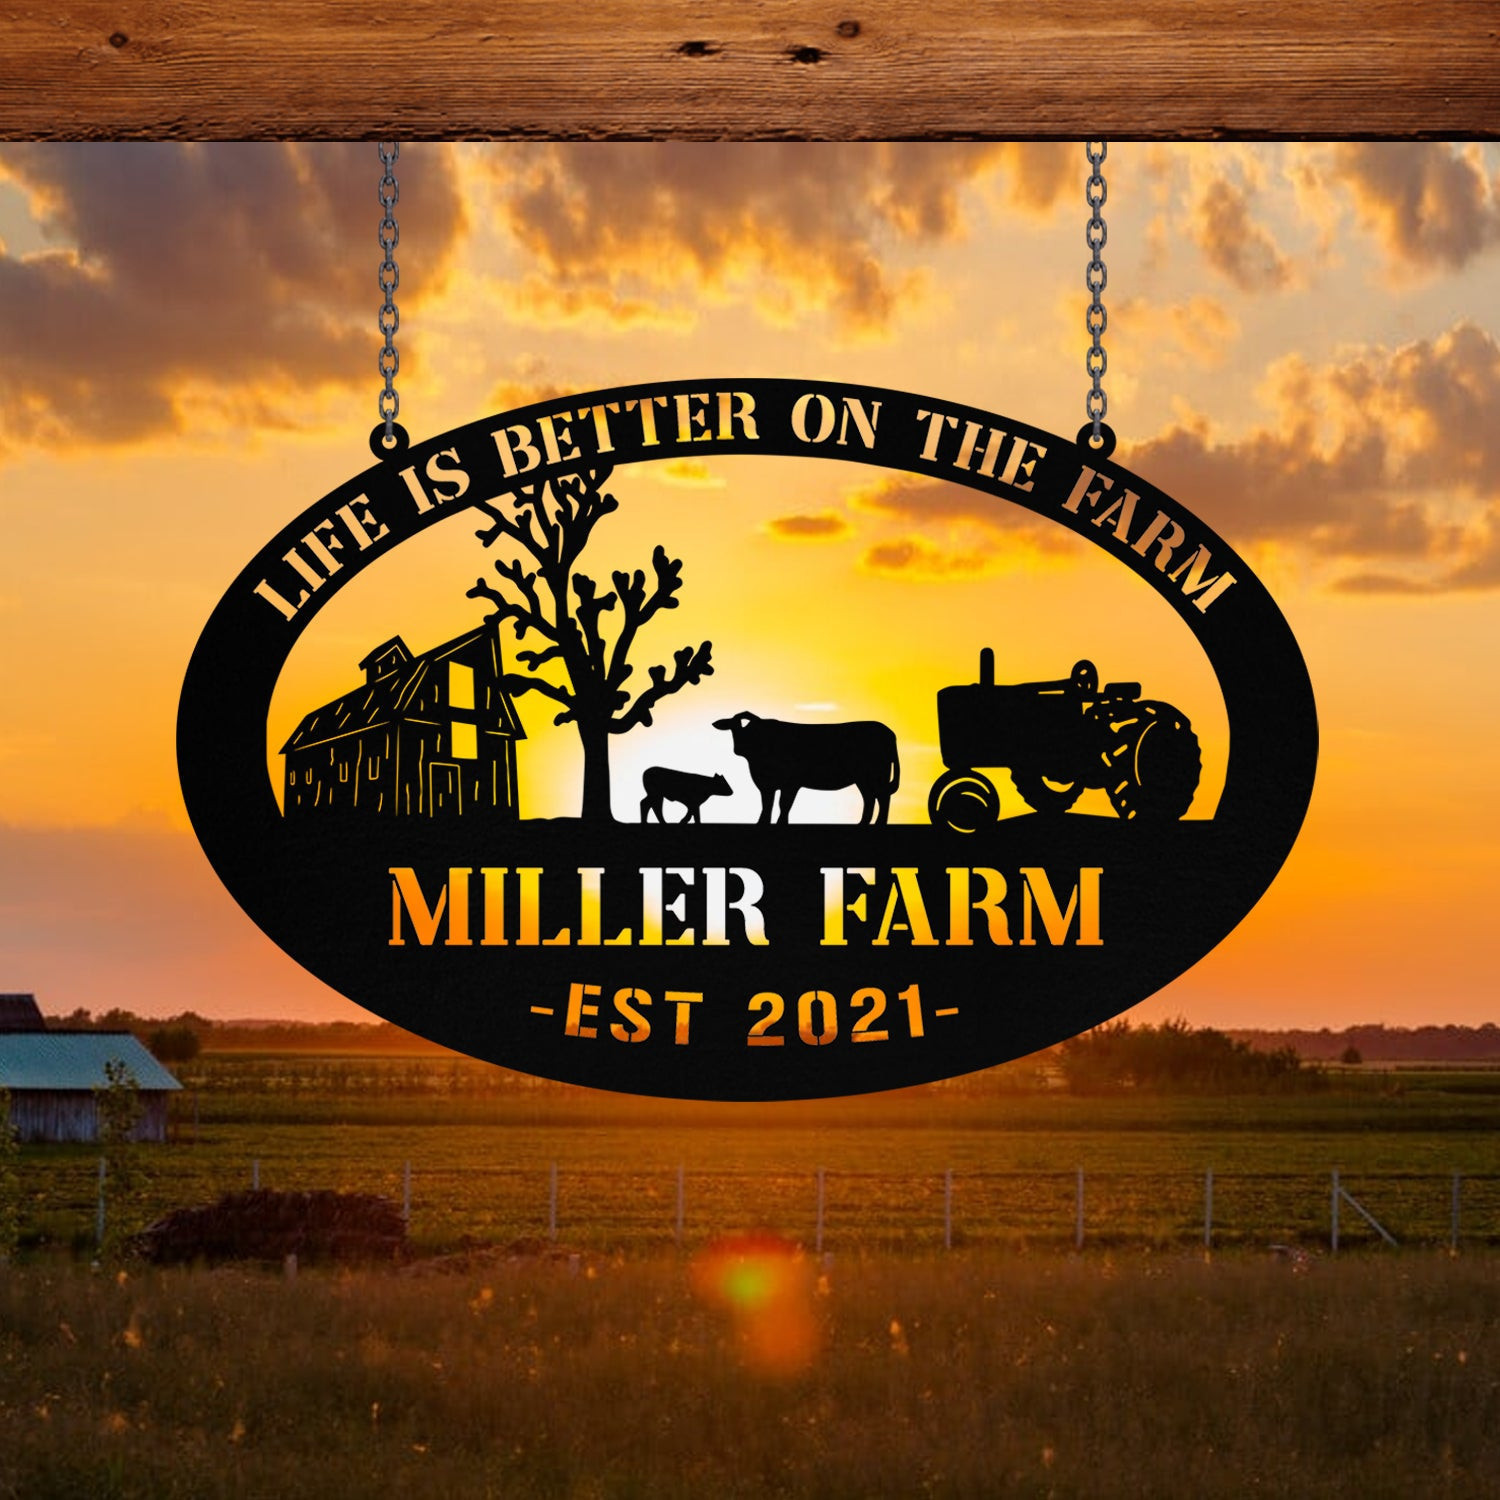 Personalized Metal Farm Sign Barn Cow Tractor Monogram, Outdoor Farmhouse, Metal Laser Cut Metal Signs Custom Gift Ideas 12x12IN